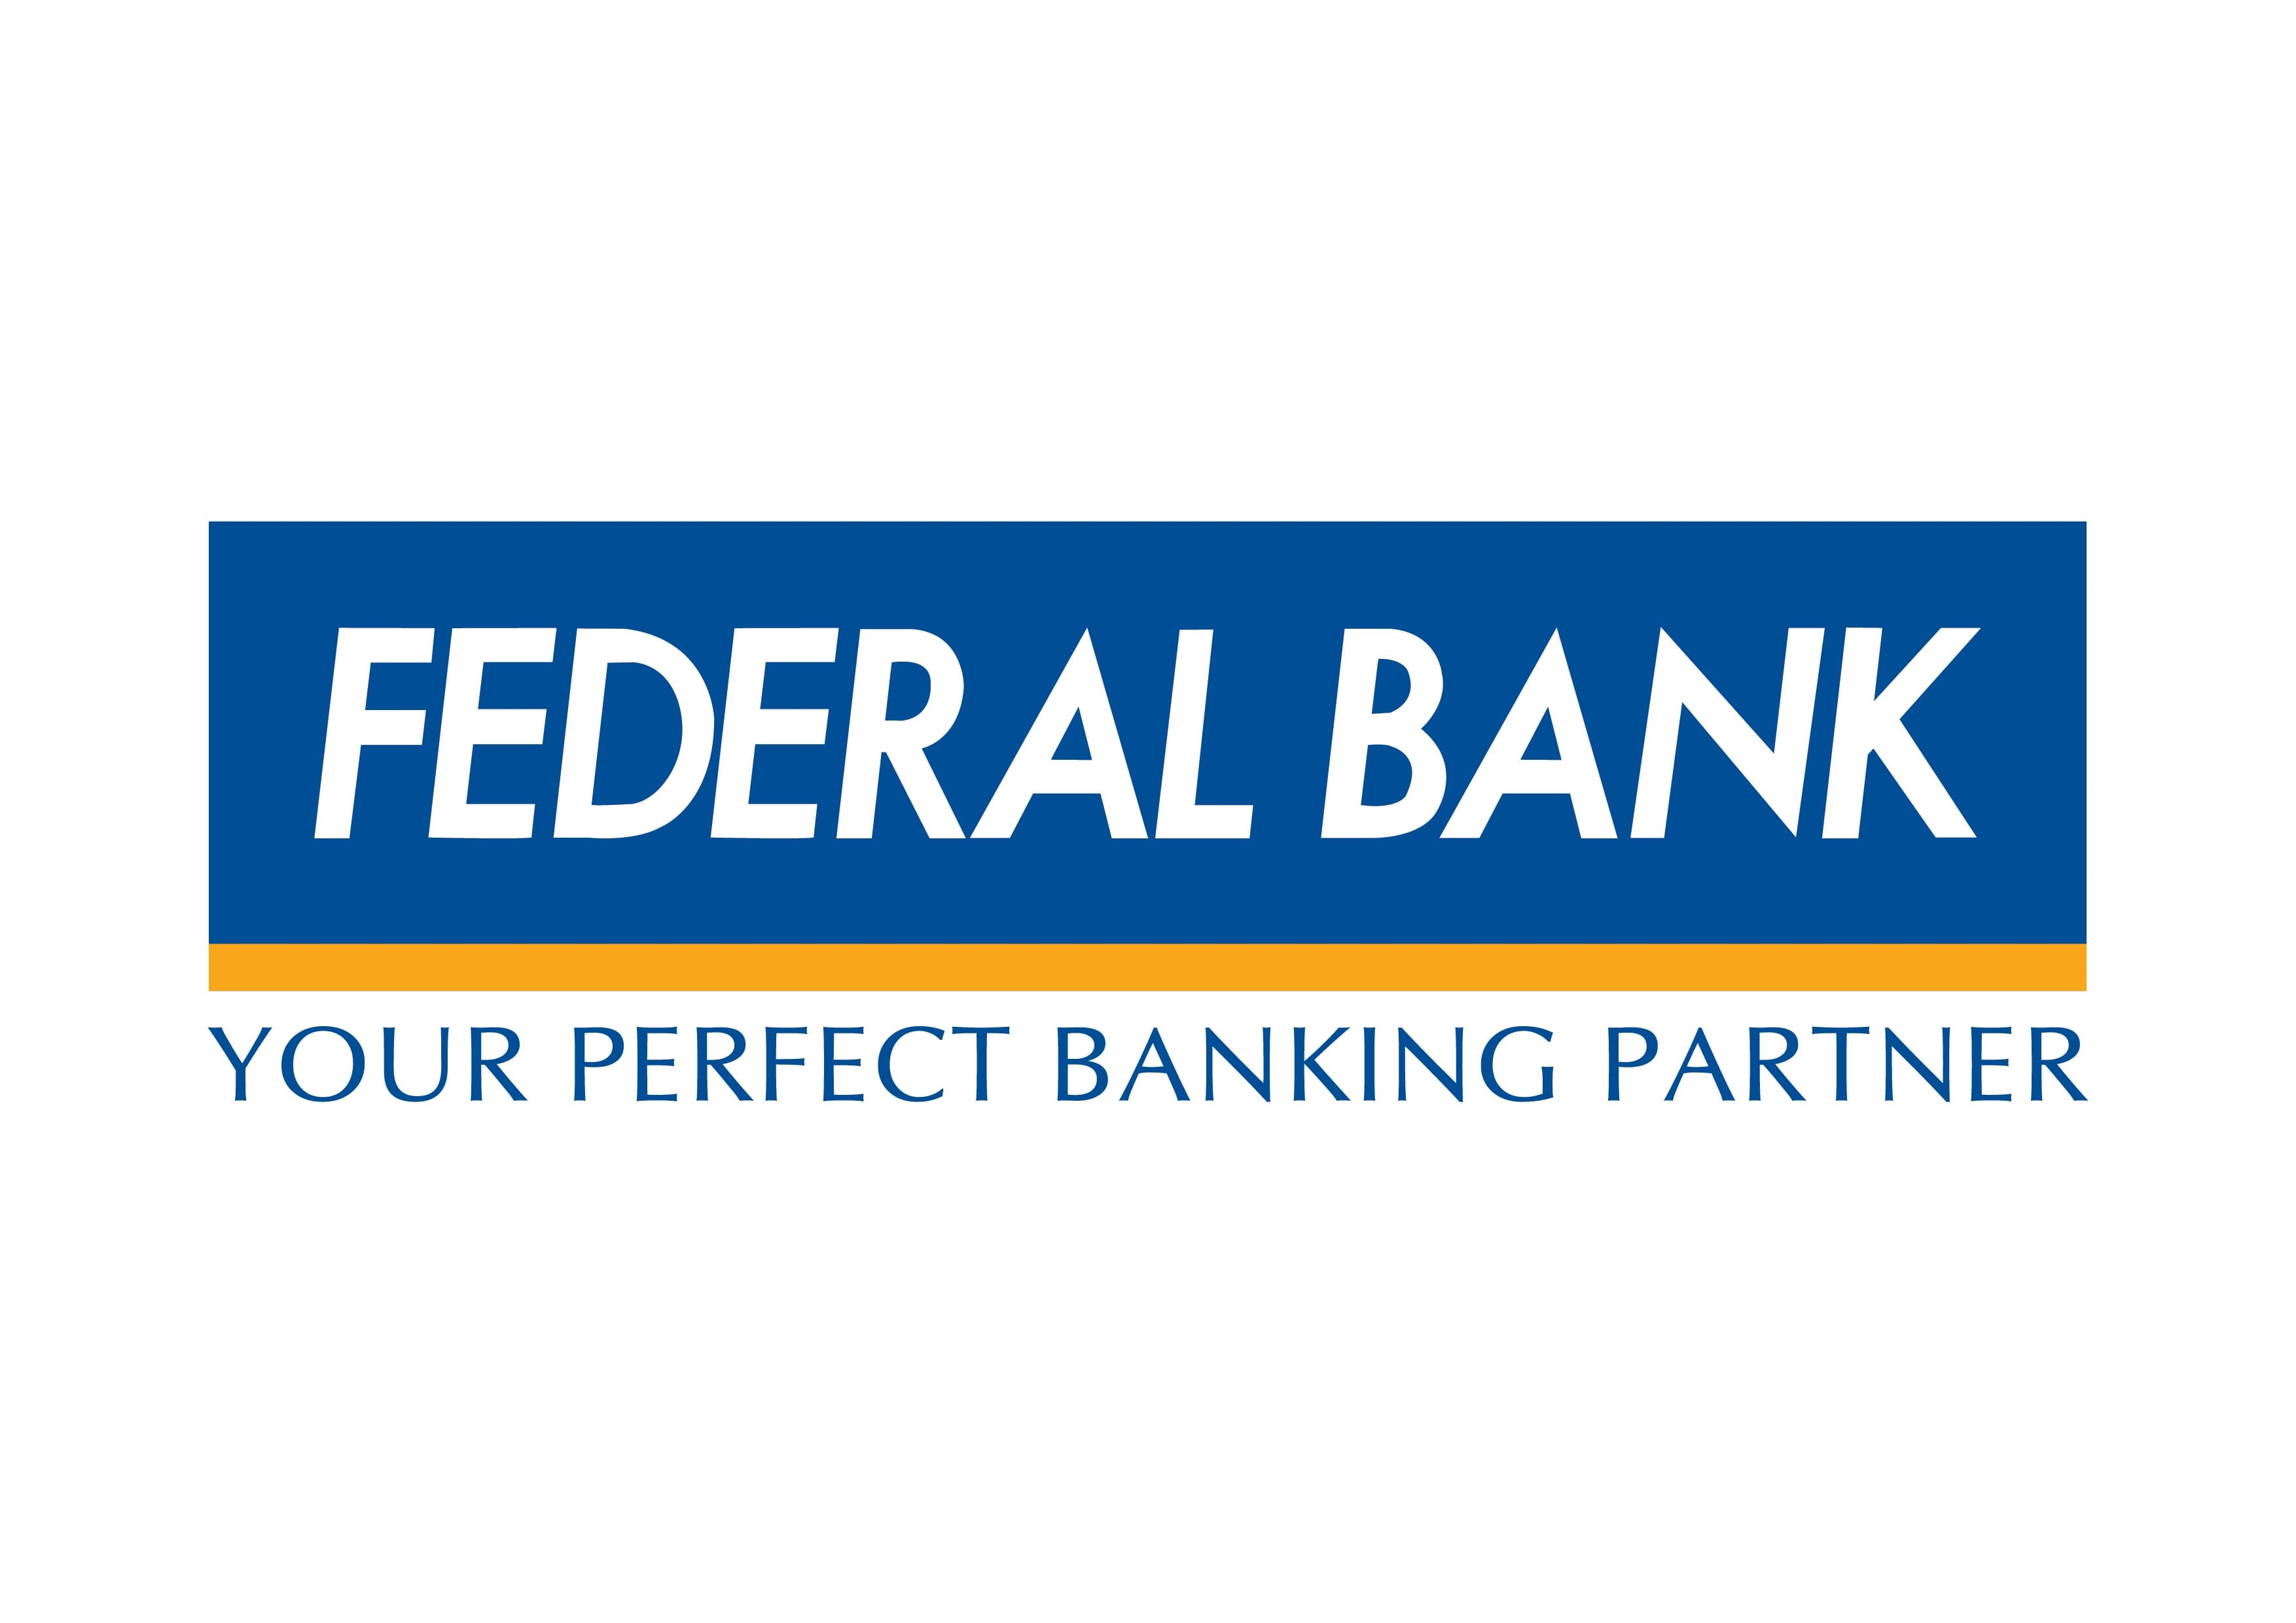 Federal Bank: The brokerage has a target price of  <span class='webrupee'>₹</span>125 for the midcap lender indicating an upside of 30 percent. According to the brokerage, key positives are increasing retail focus, strong fee income, adequate capitalization, and prudent provisioning. It expects steady provision requirements along with healthy growth in the balance sheet and NIMs to deliver RoA/RoE of 1.1%/14.5% by FY23E.